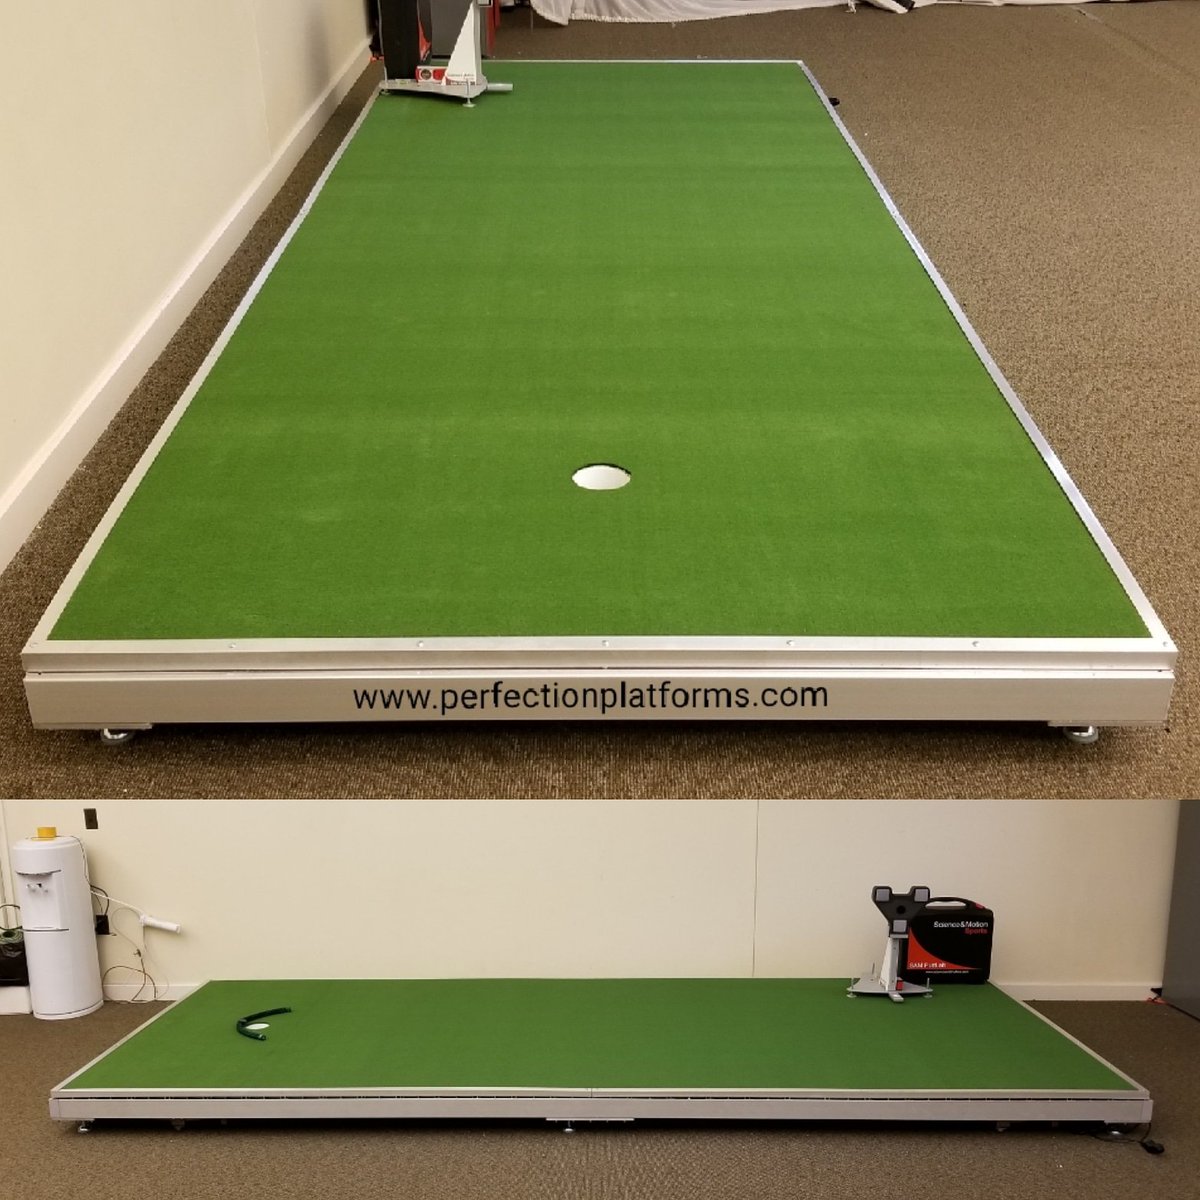 Another build complete. This one will be put to good use by @super_g1 and his students at @SkokieCC. We look forward to hearing great things! #perfectionplatforms